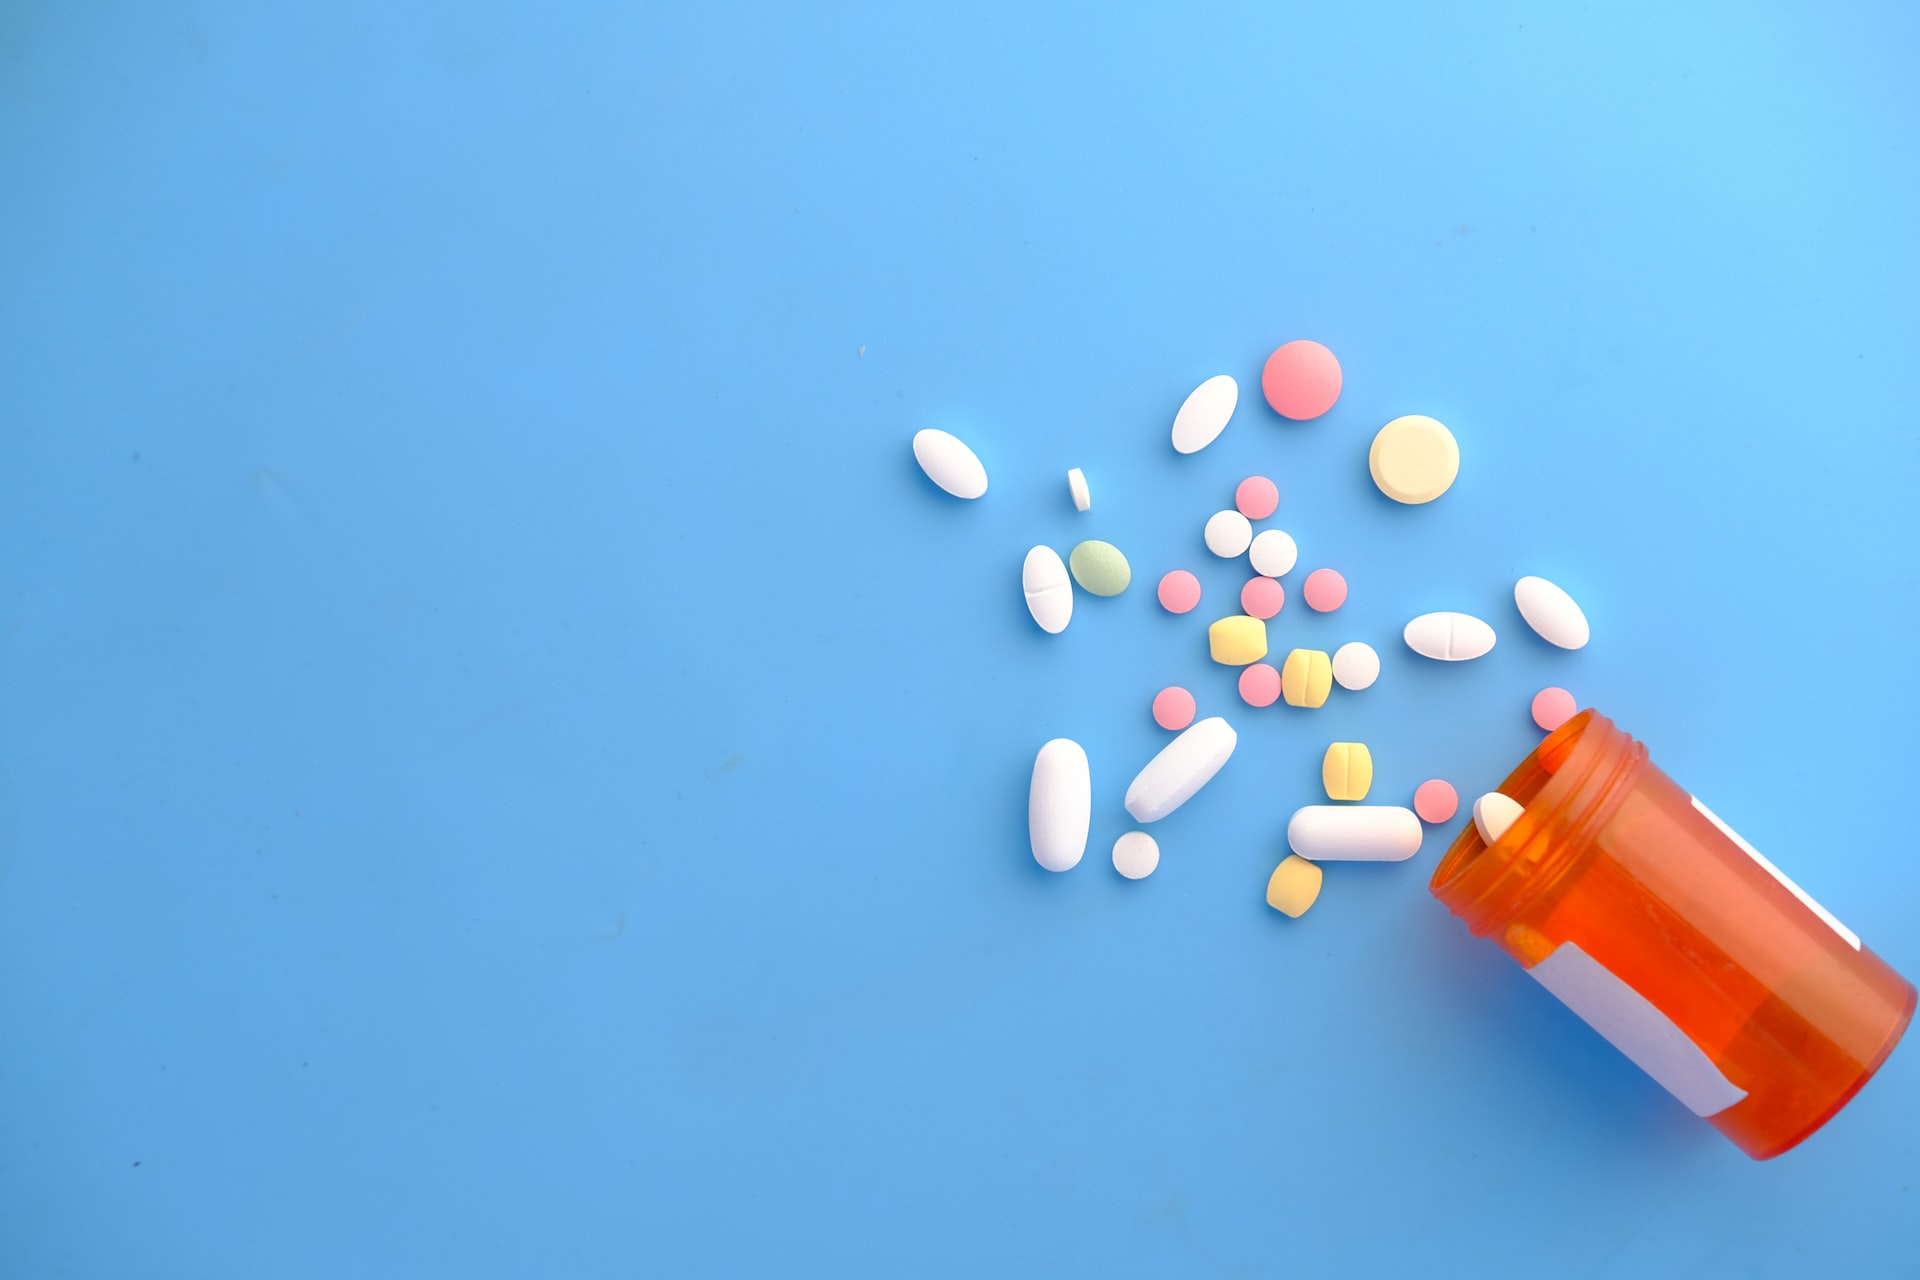 Pills spilled out of the bottle as a visual representation of alternatives to pain medication for chronic pain relief